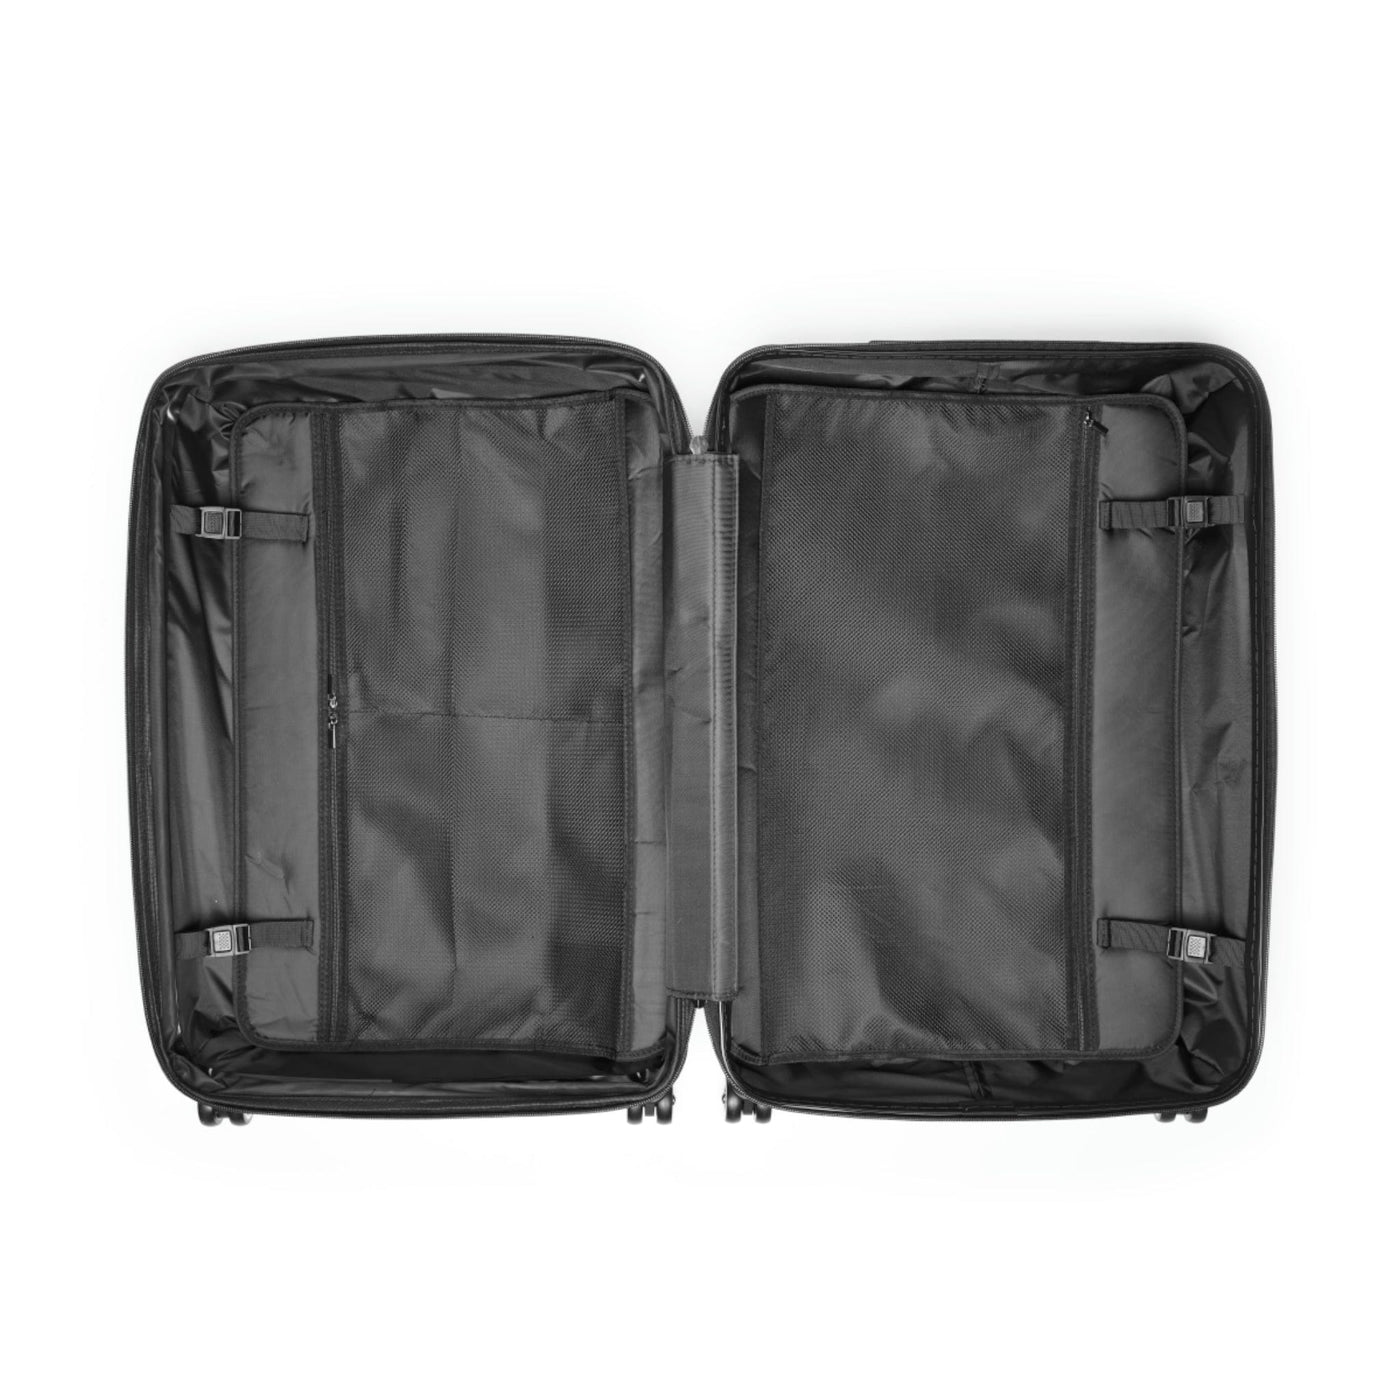 Gamer Fresh Journey's Premium On The Go Gaming Luggage Suitcases | Grey